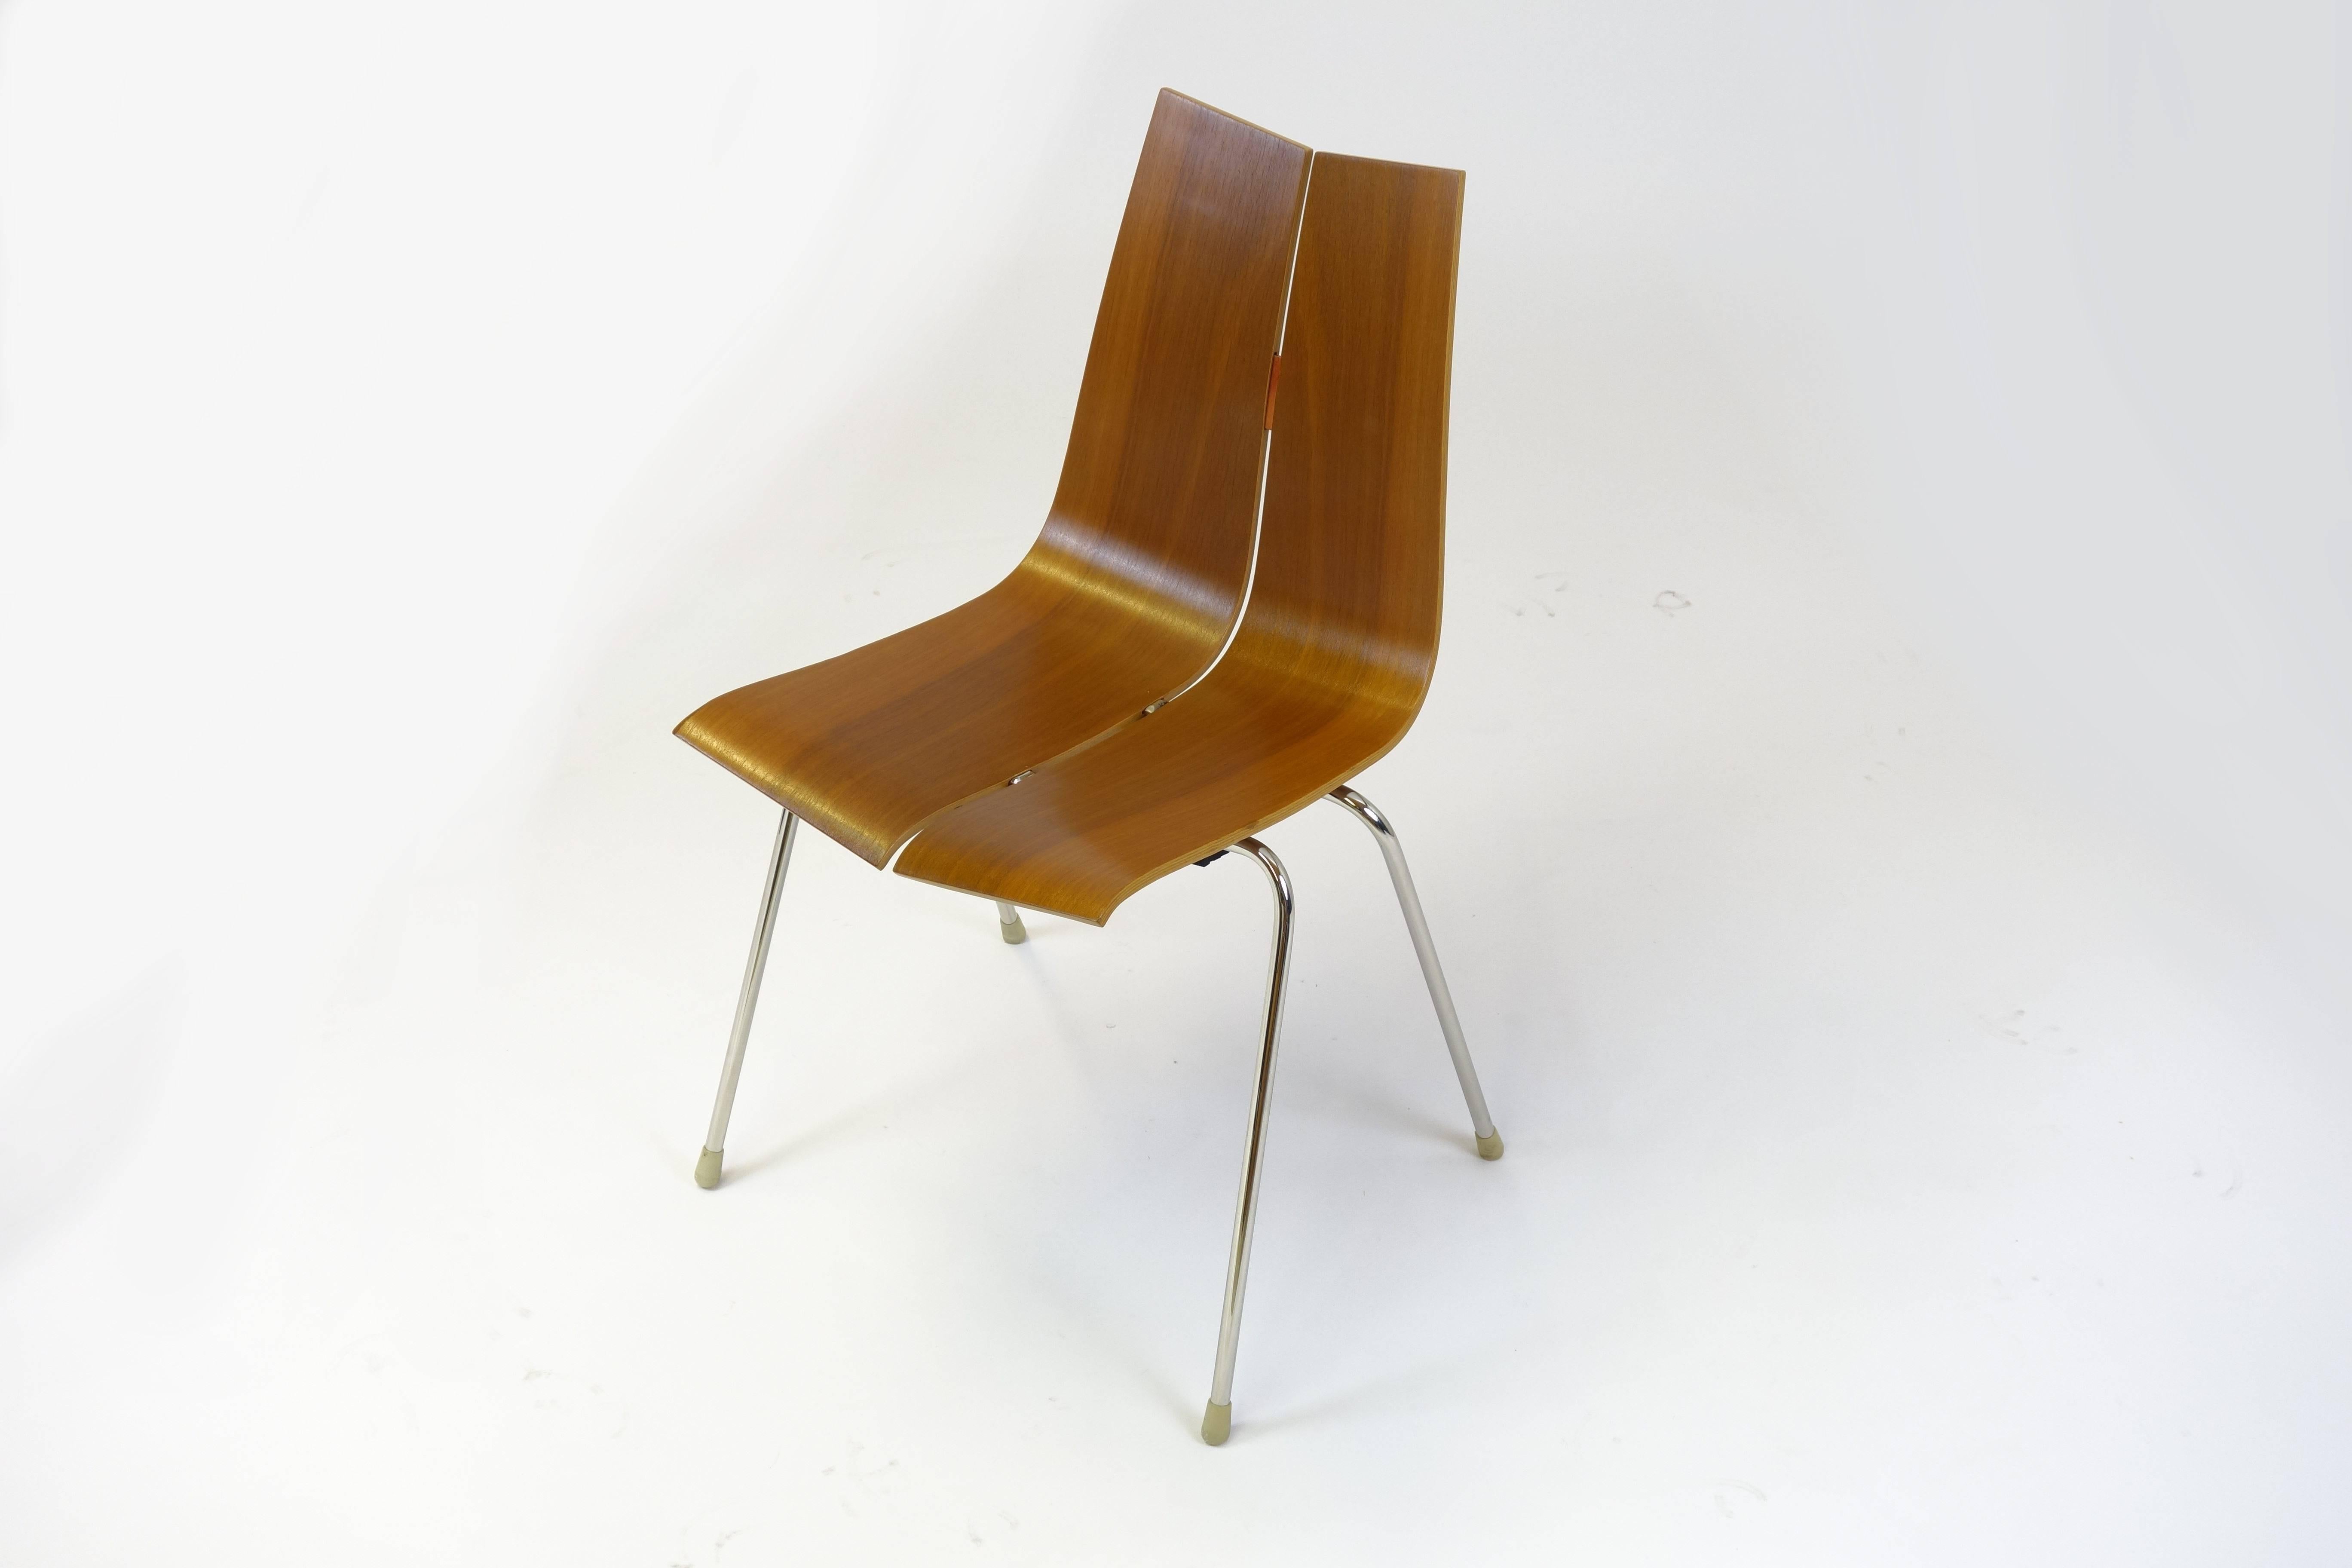 Plated Stacking Chairs Designed by Hans Bellmann, Horgen-Glarus Seat Stool, 1952 For Sale